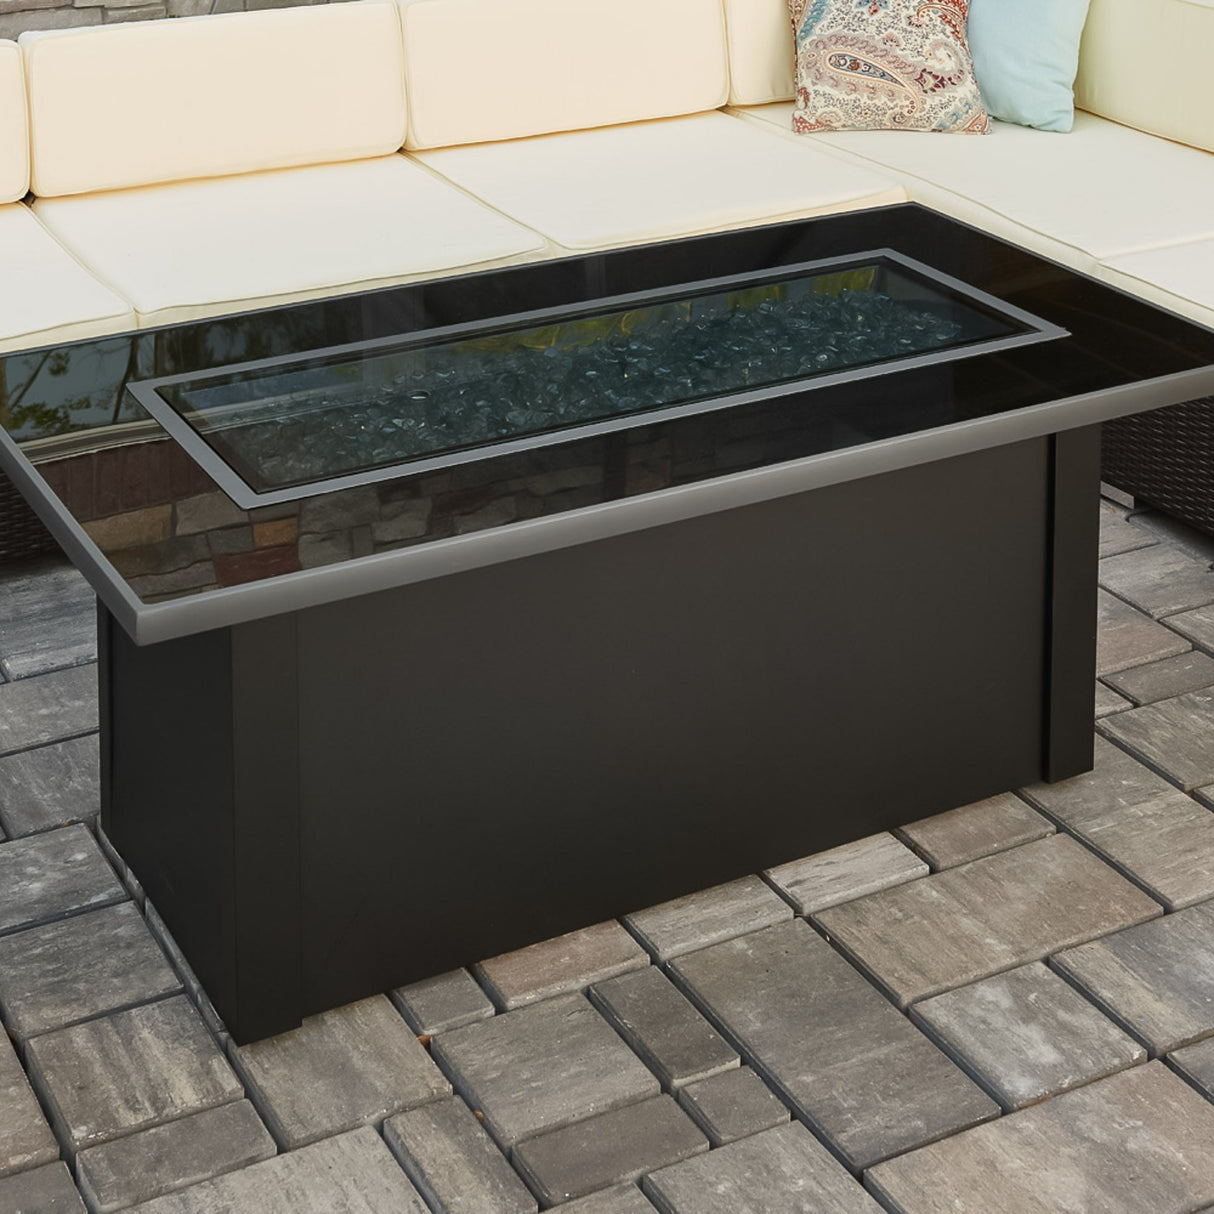 The glass cover placed on top of the Monte Carlo Linear Gas Fire Pit Table allowing it to be used as an outdoor table